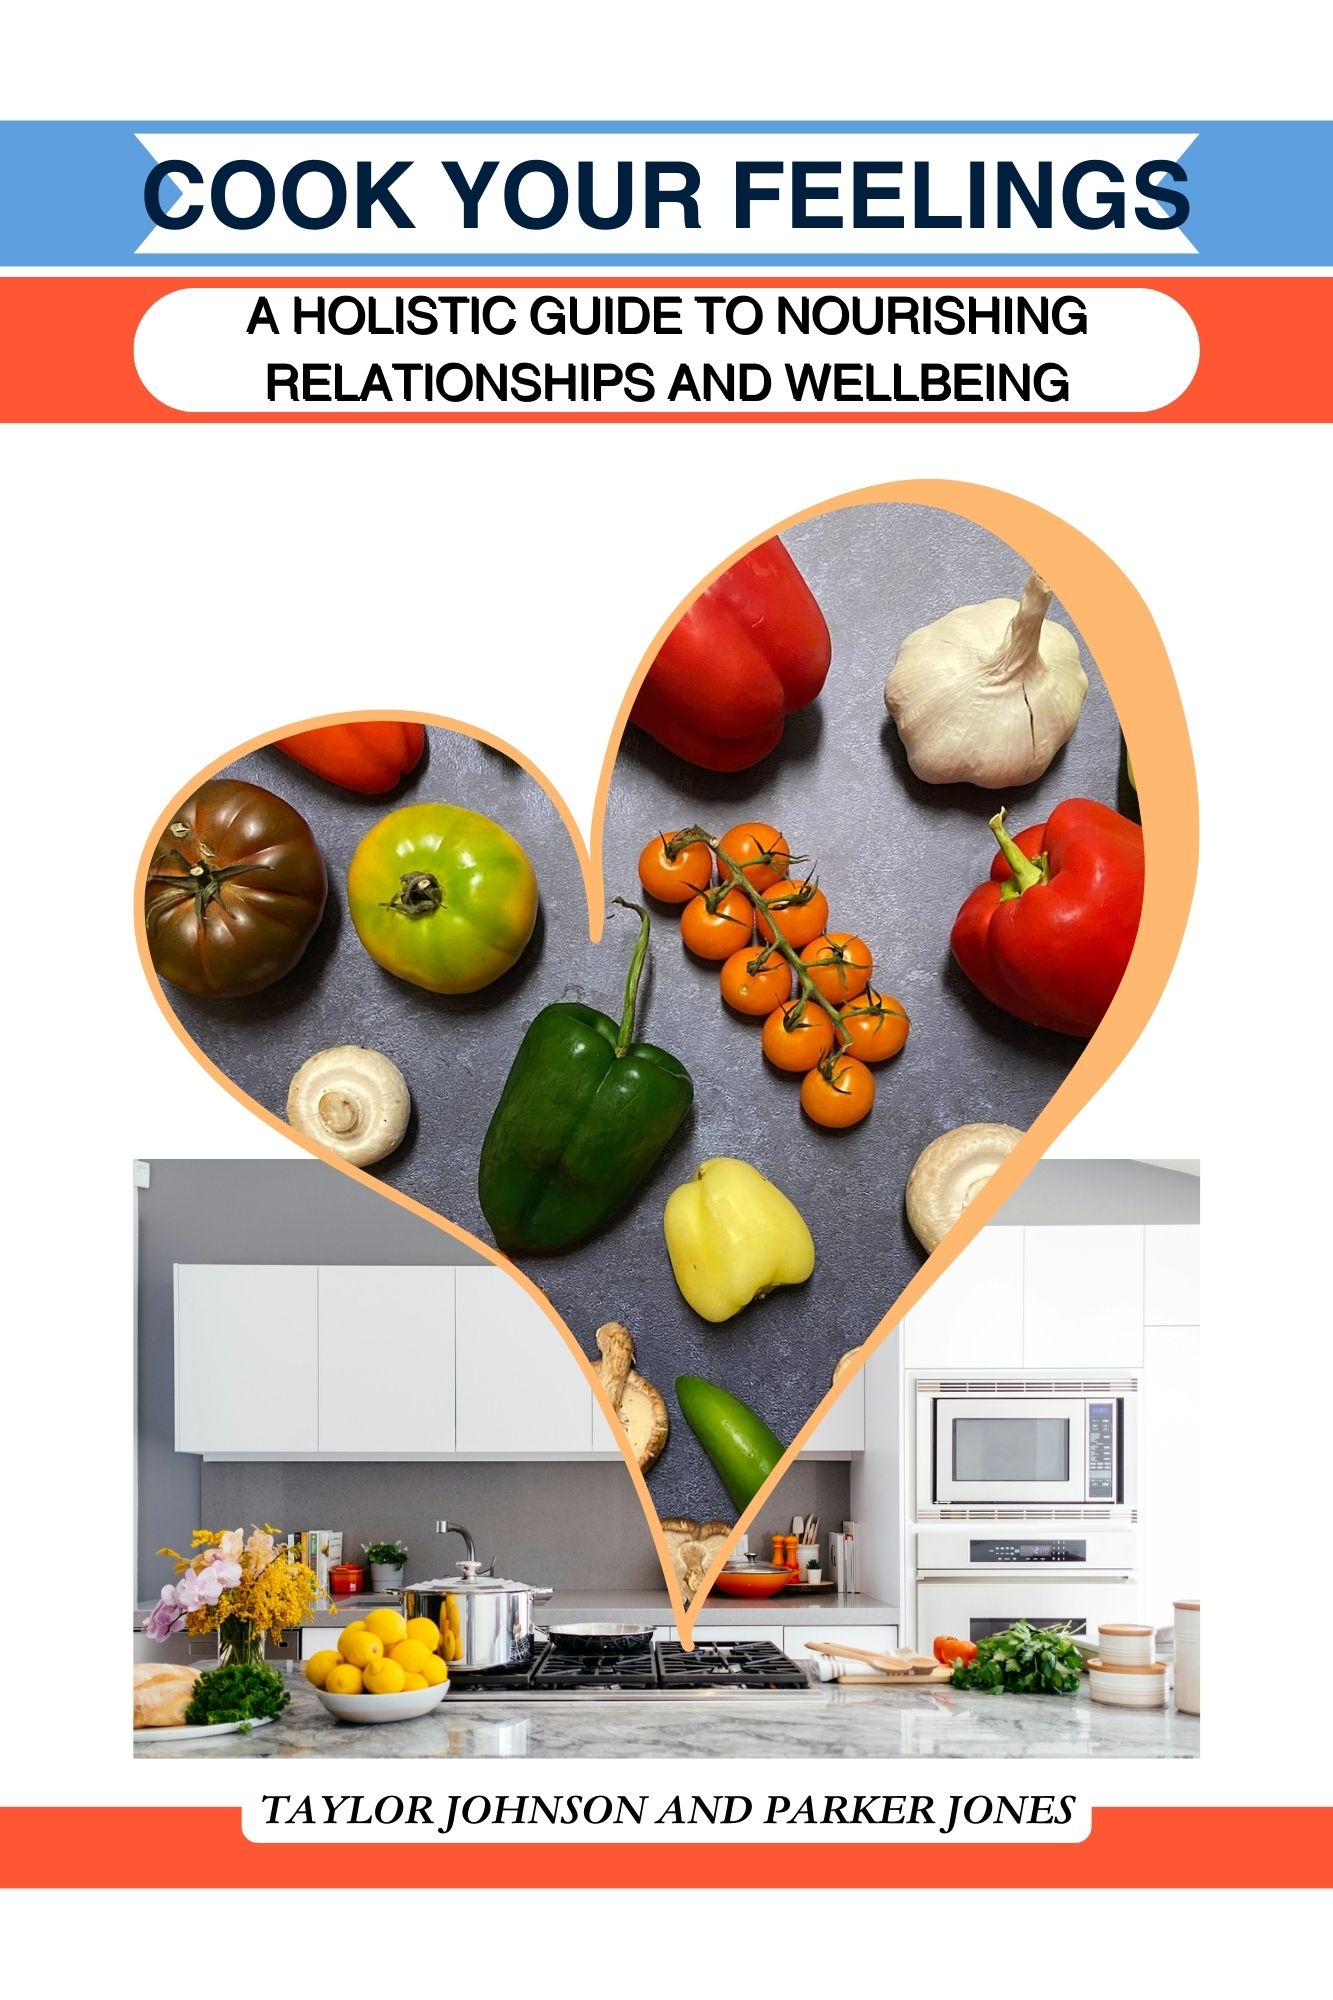 alt="Book cover for Cook Your Feelings: A Holistic Guide to Nourishing Relationships and Wellbeing"